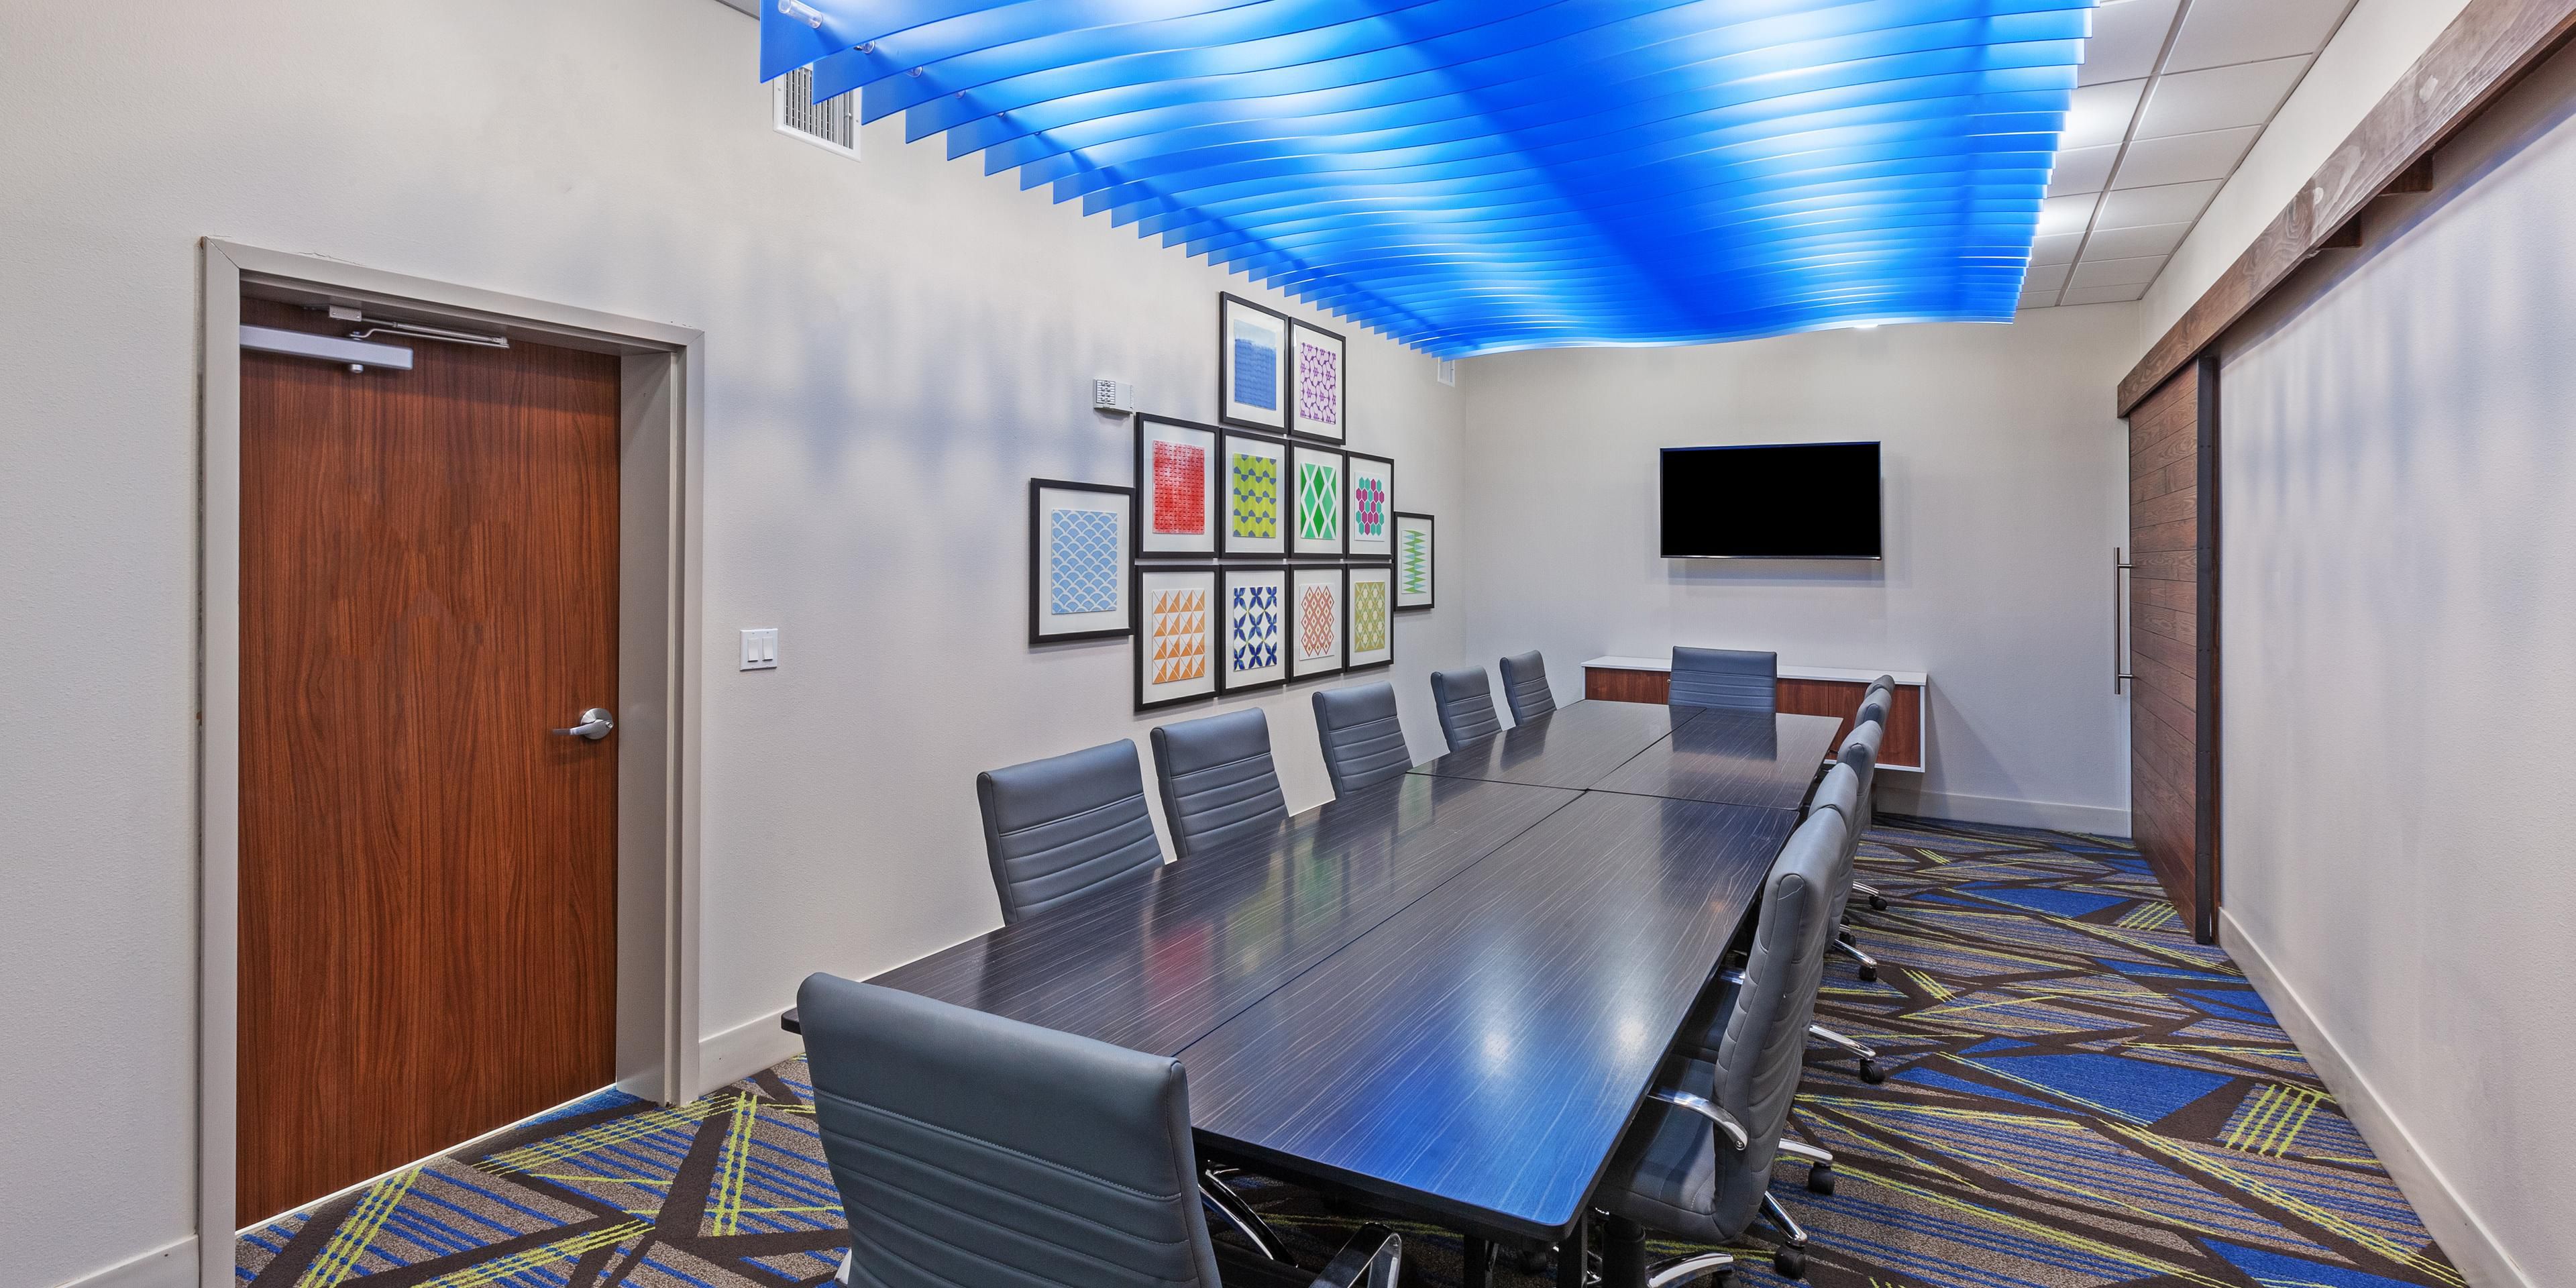 Small meetings play a vital role in the success of many organizations. Are you planning a small corporate meeting, board retreat, or brainstorming session? Our flexible meeting space is sure to lead to big ideas! Whether you're a group of 15 or 25, we can help! Our Team is dedicated to making your meeting a huge success! 
